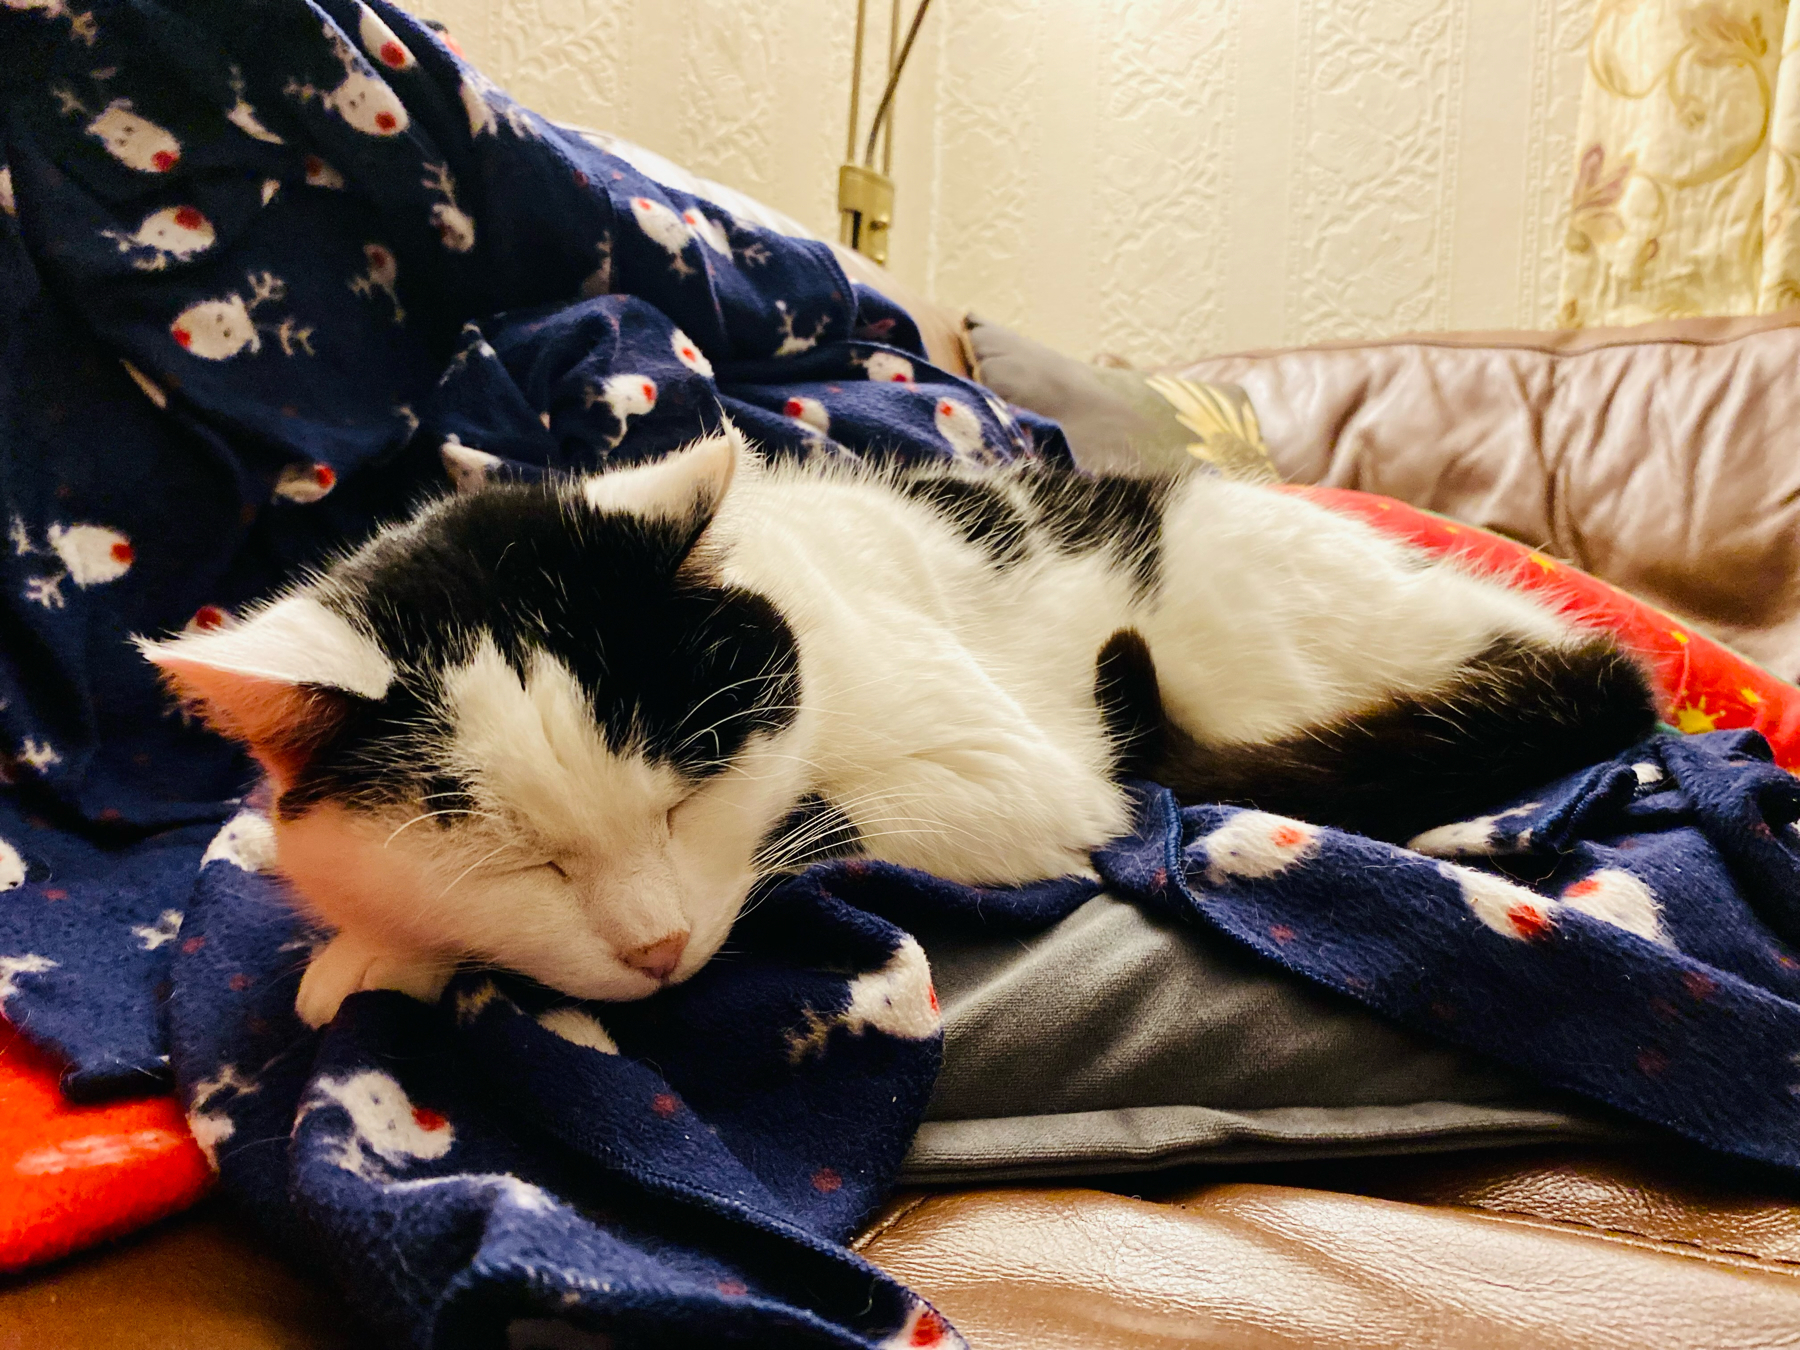 A black and white cat sleeping on a blue blanket with a reindeer pattern. The blanket is on a leather sofa against a patterned wallpaper background.